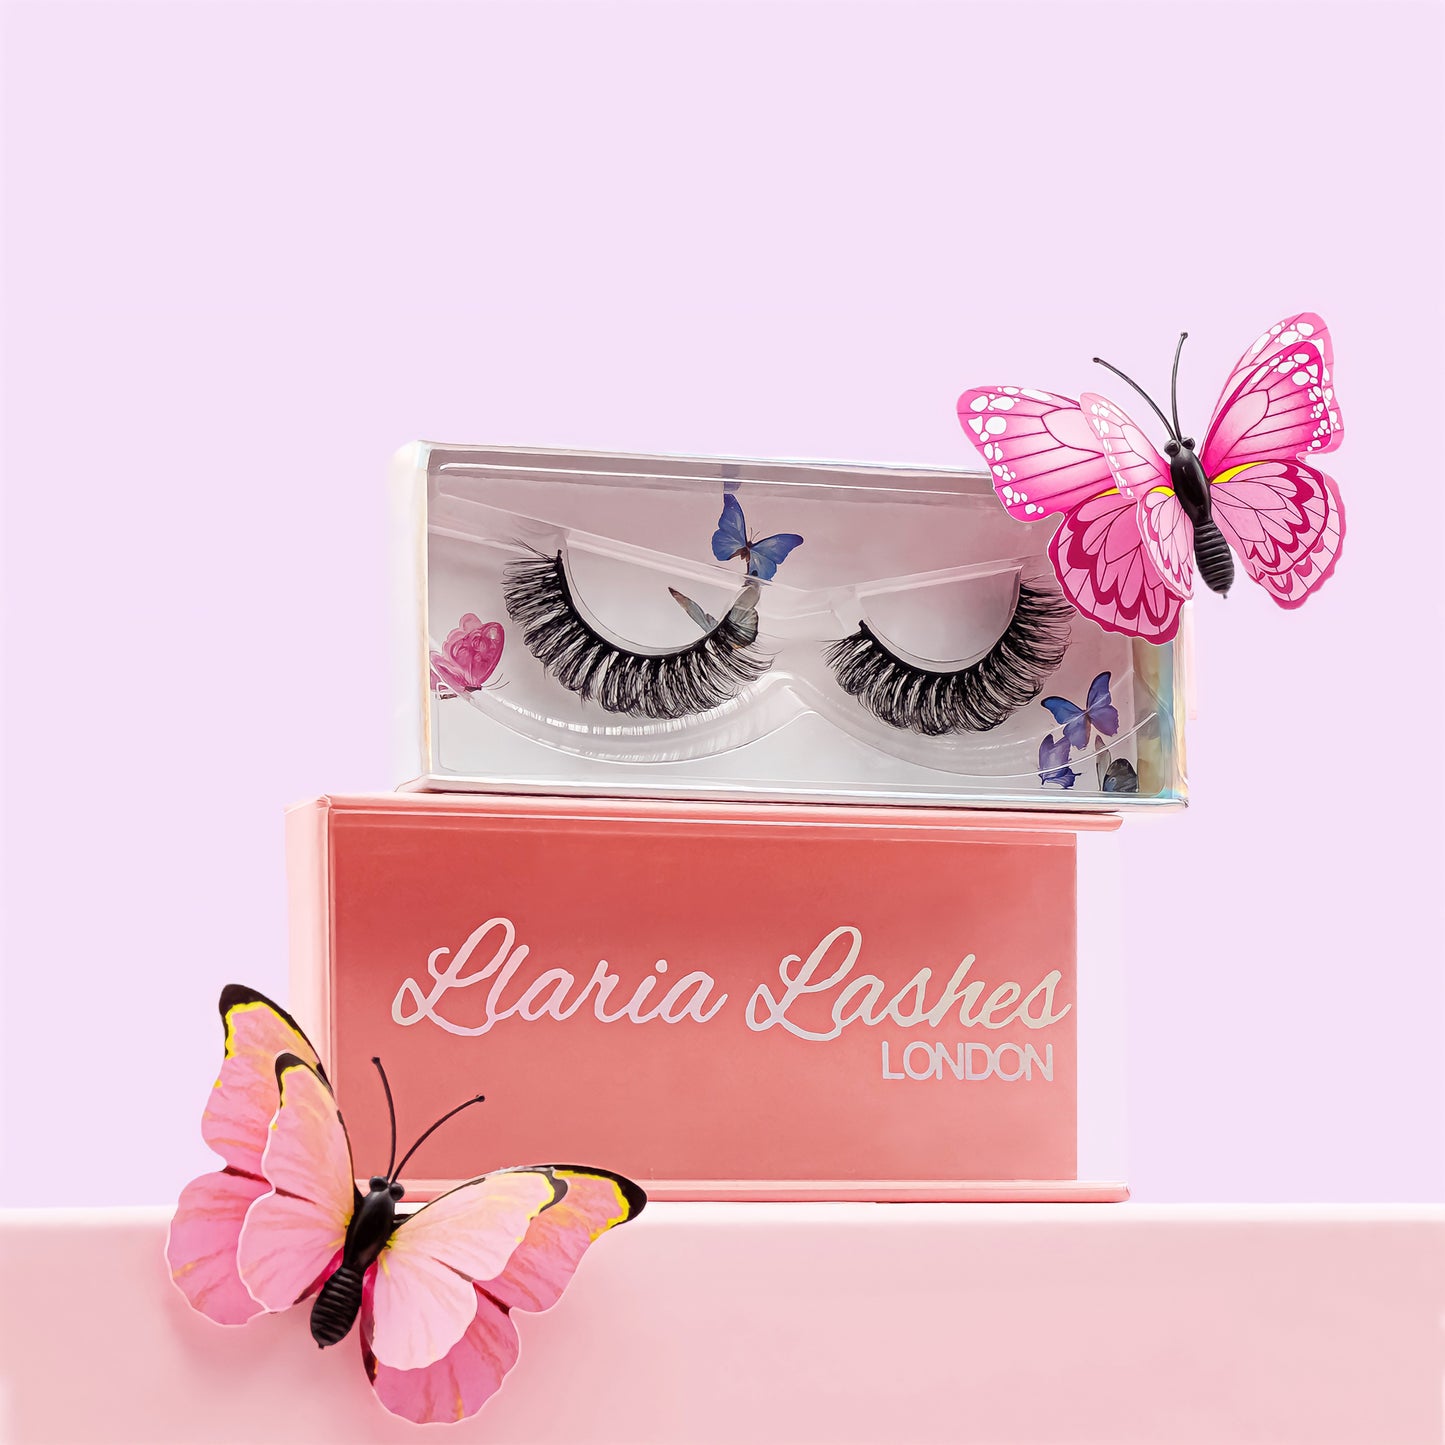 long and wispy bold d curl russian style lash faux mink false eyelashes in lash box with butterflies.